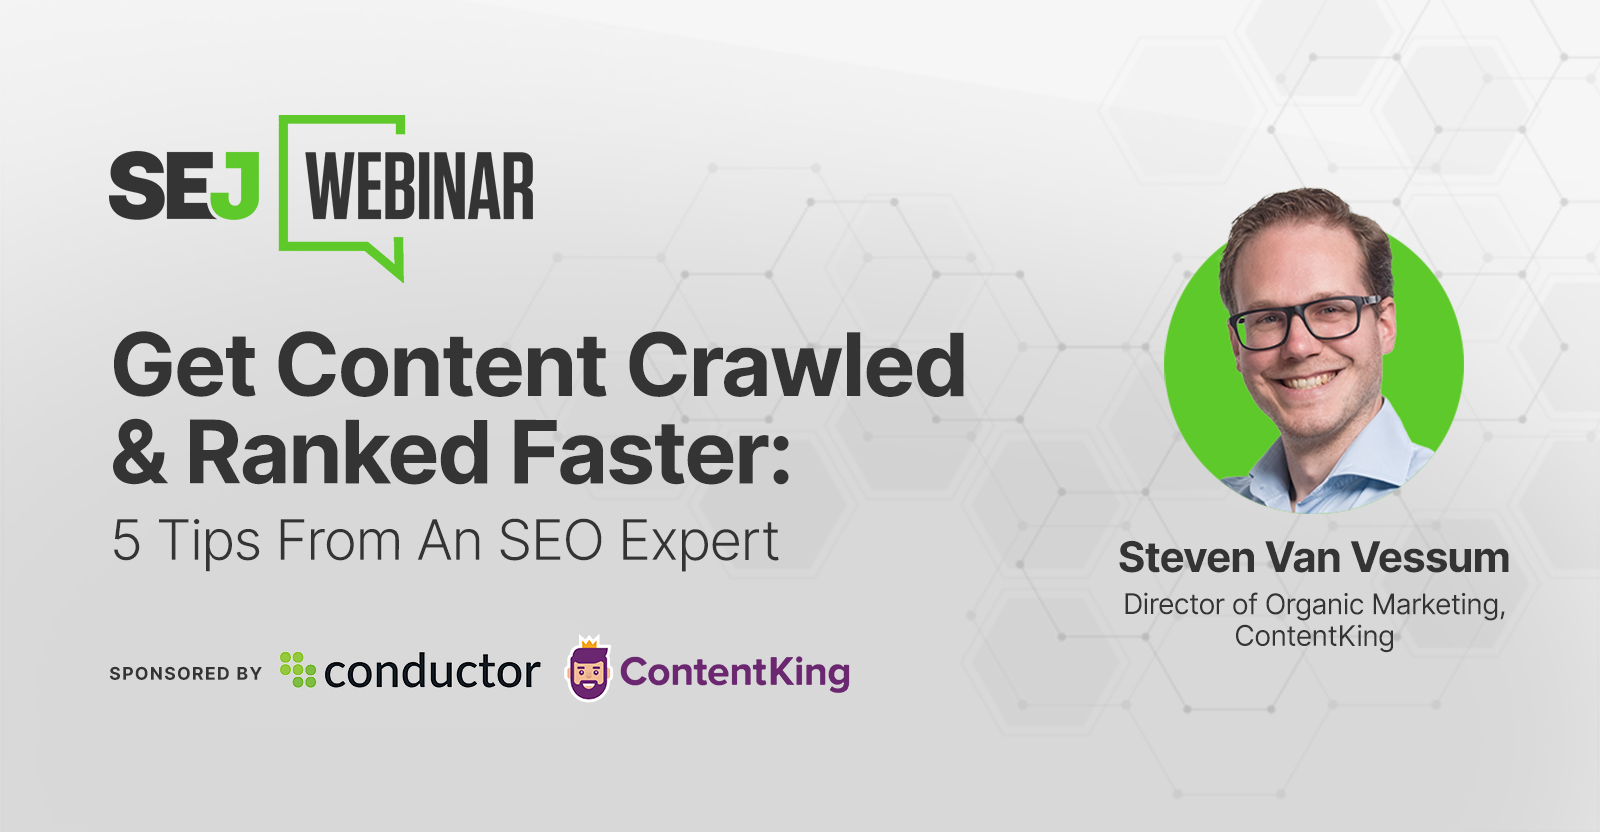 Get Content Crawled & Ranked Faster: 5 Tips From An SEO Expert [Webinar] via @sejournal, @hethr_campbell